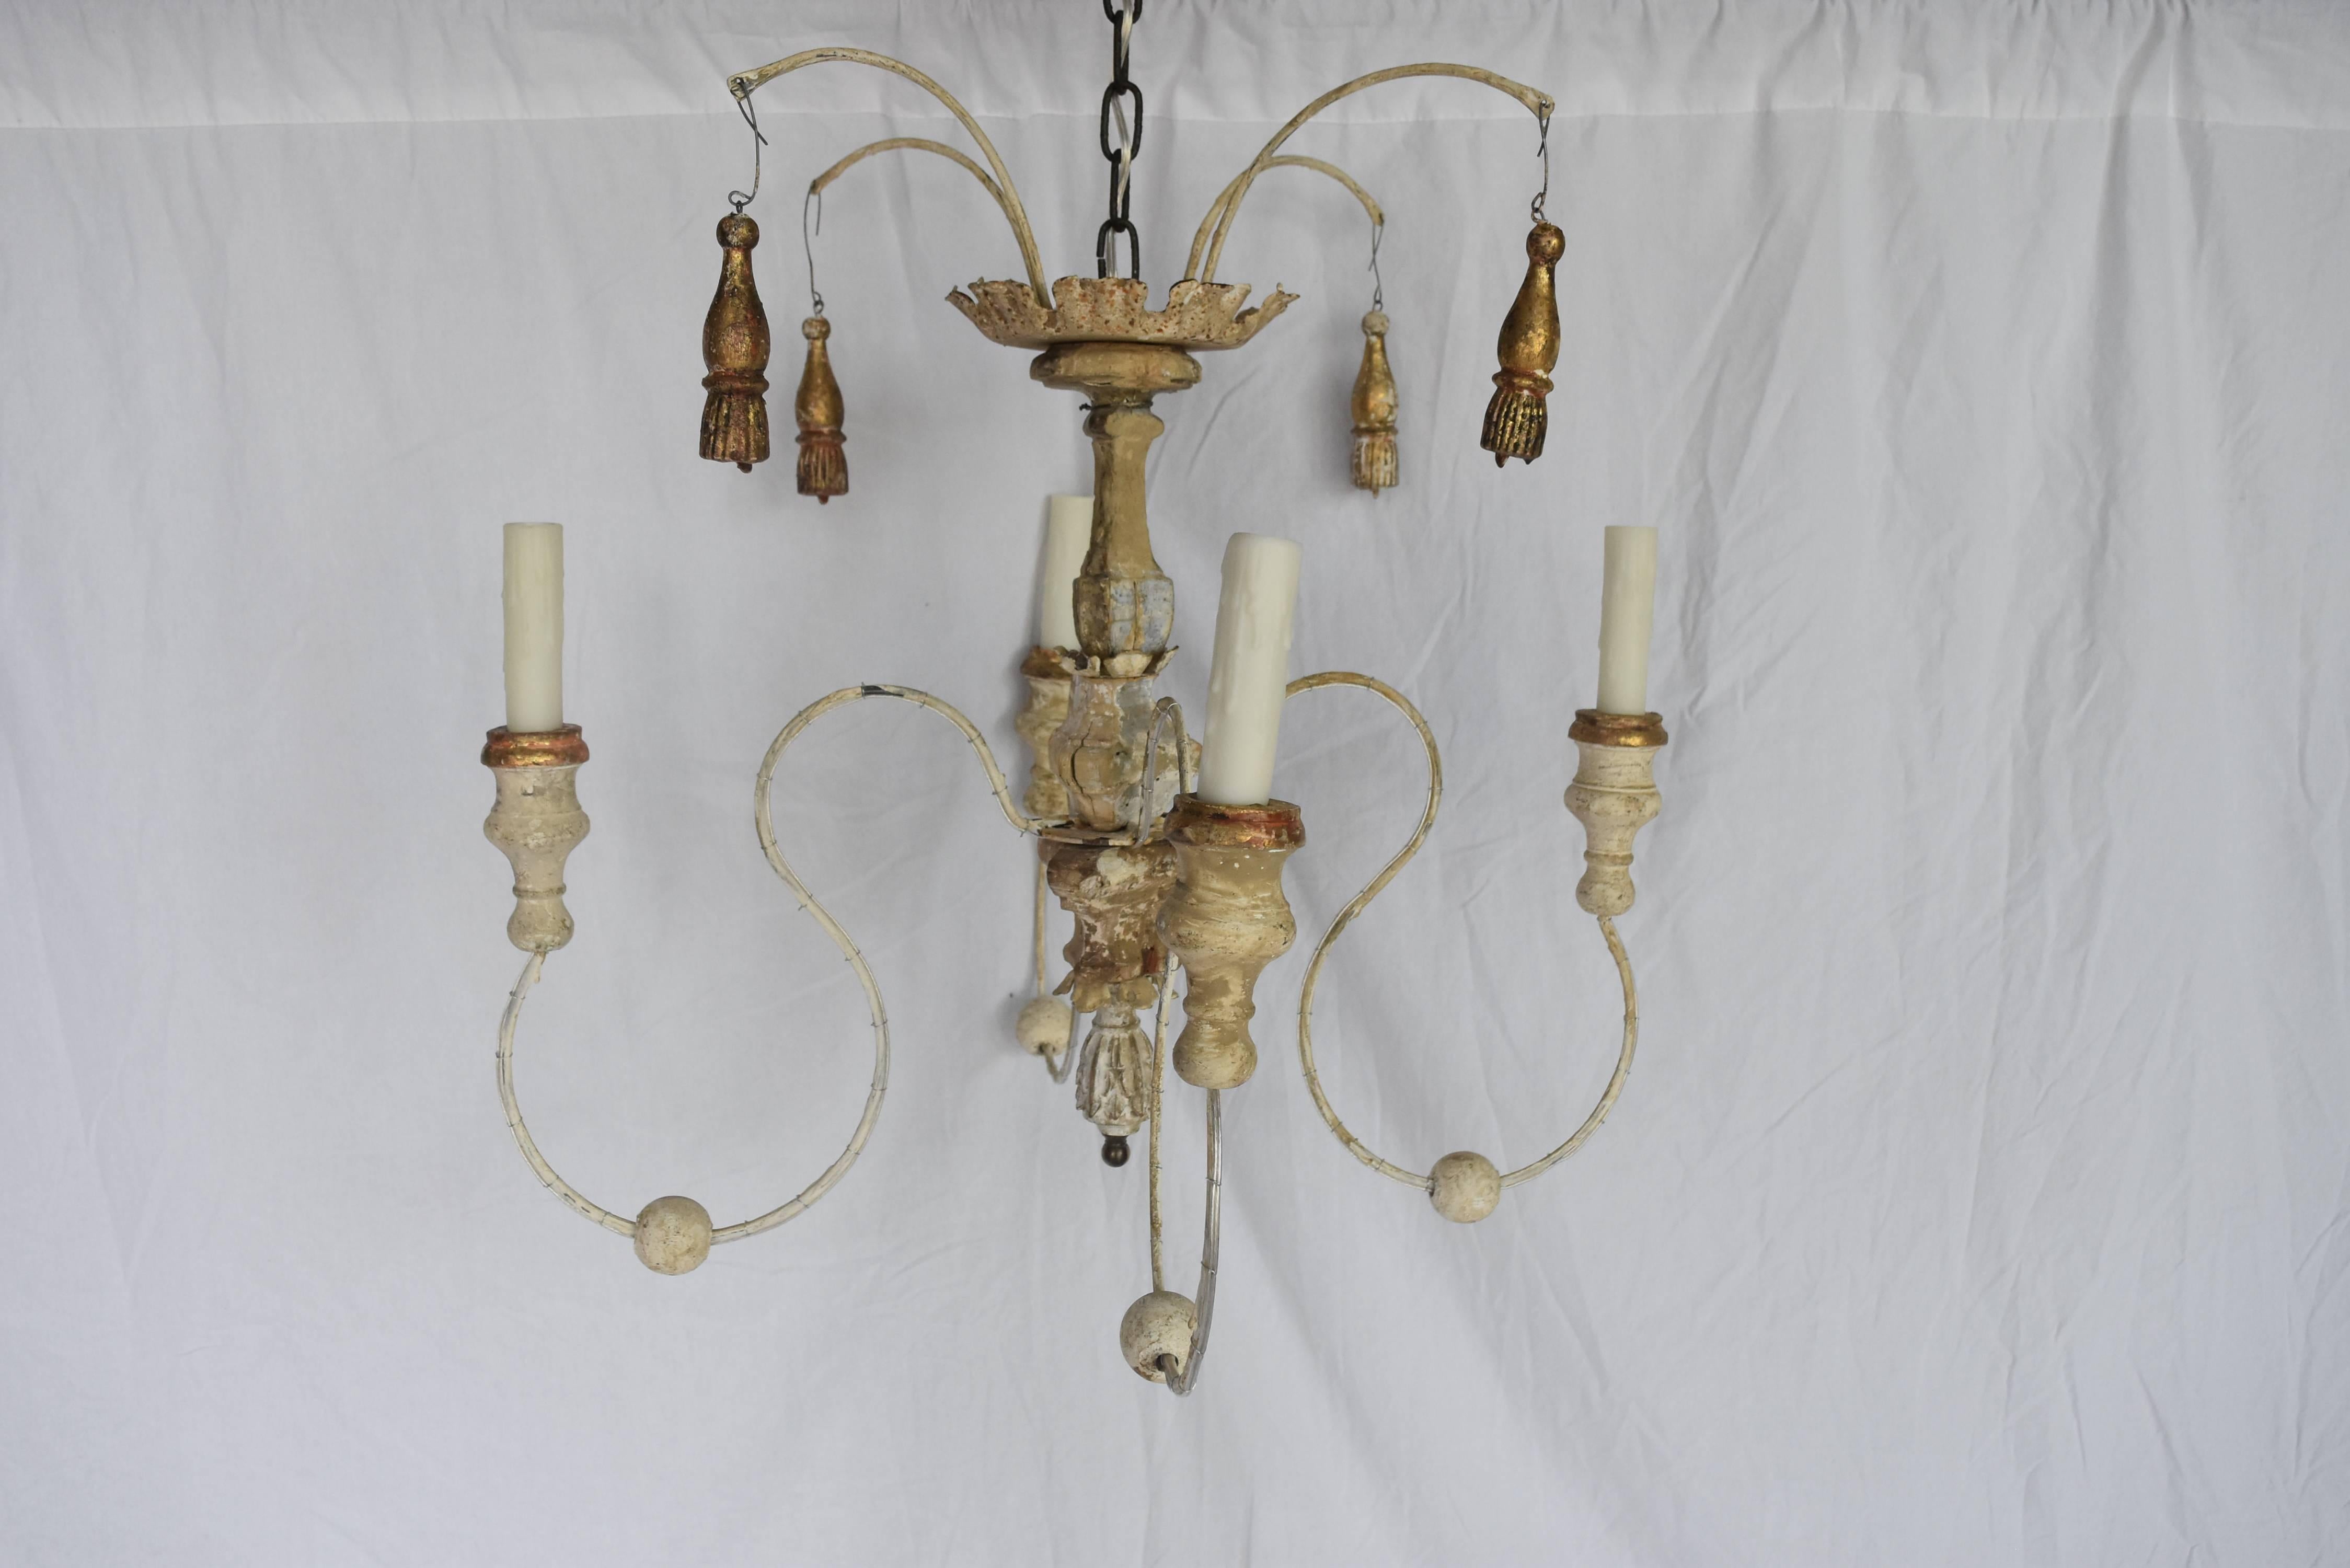 This is a charming one of a kind spider chandelier from Italy that has been made with 18th century church altar elements and new iron and bobeches. It has been newly wired with a 12